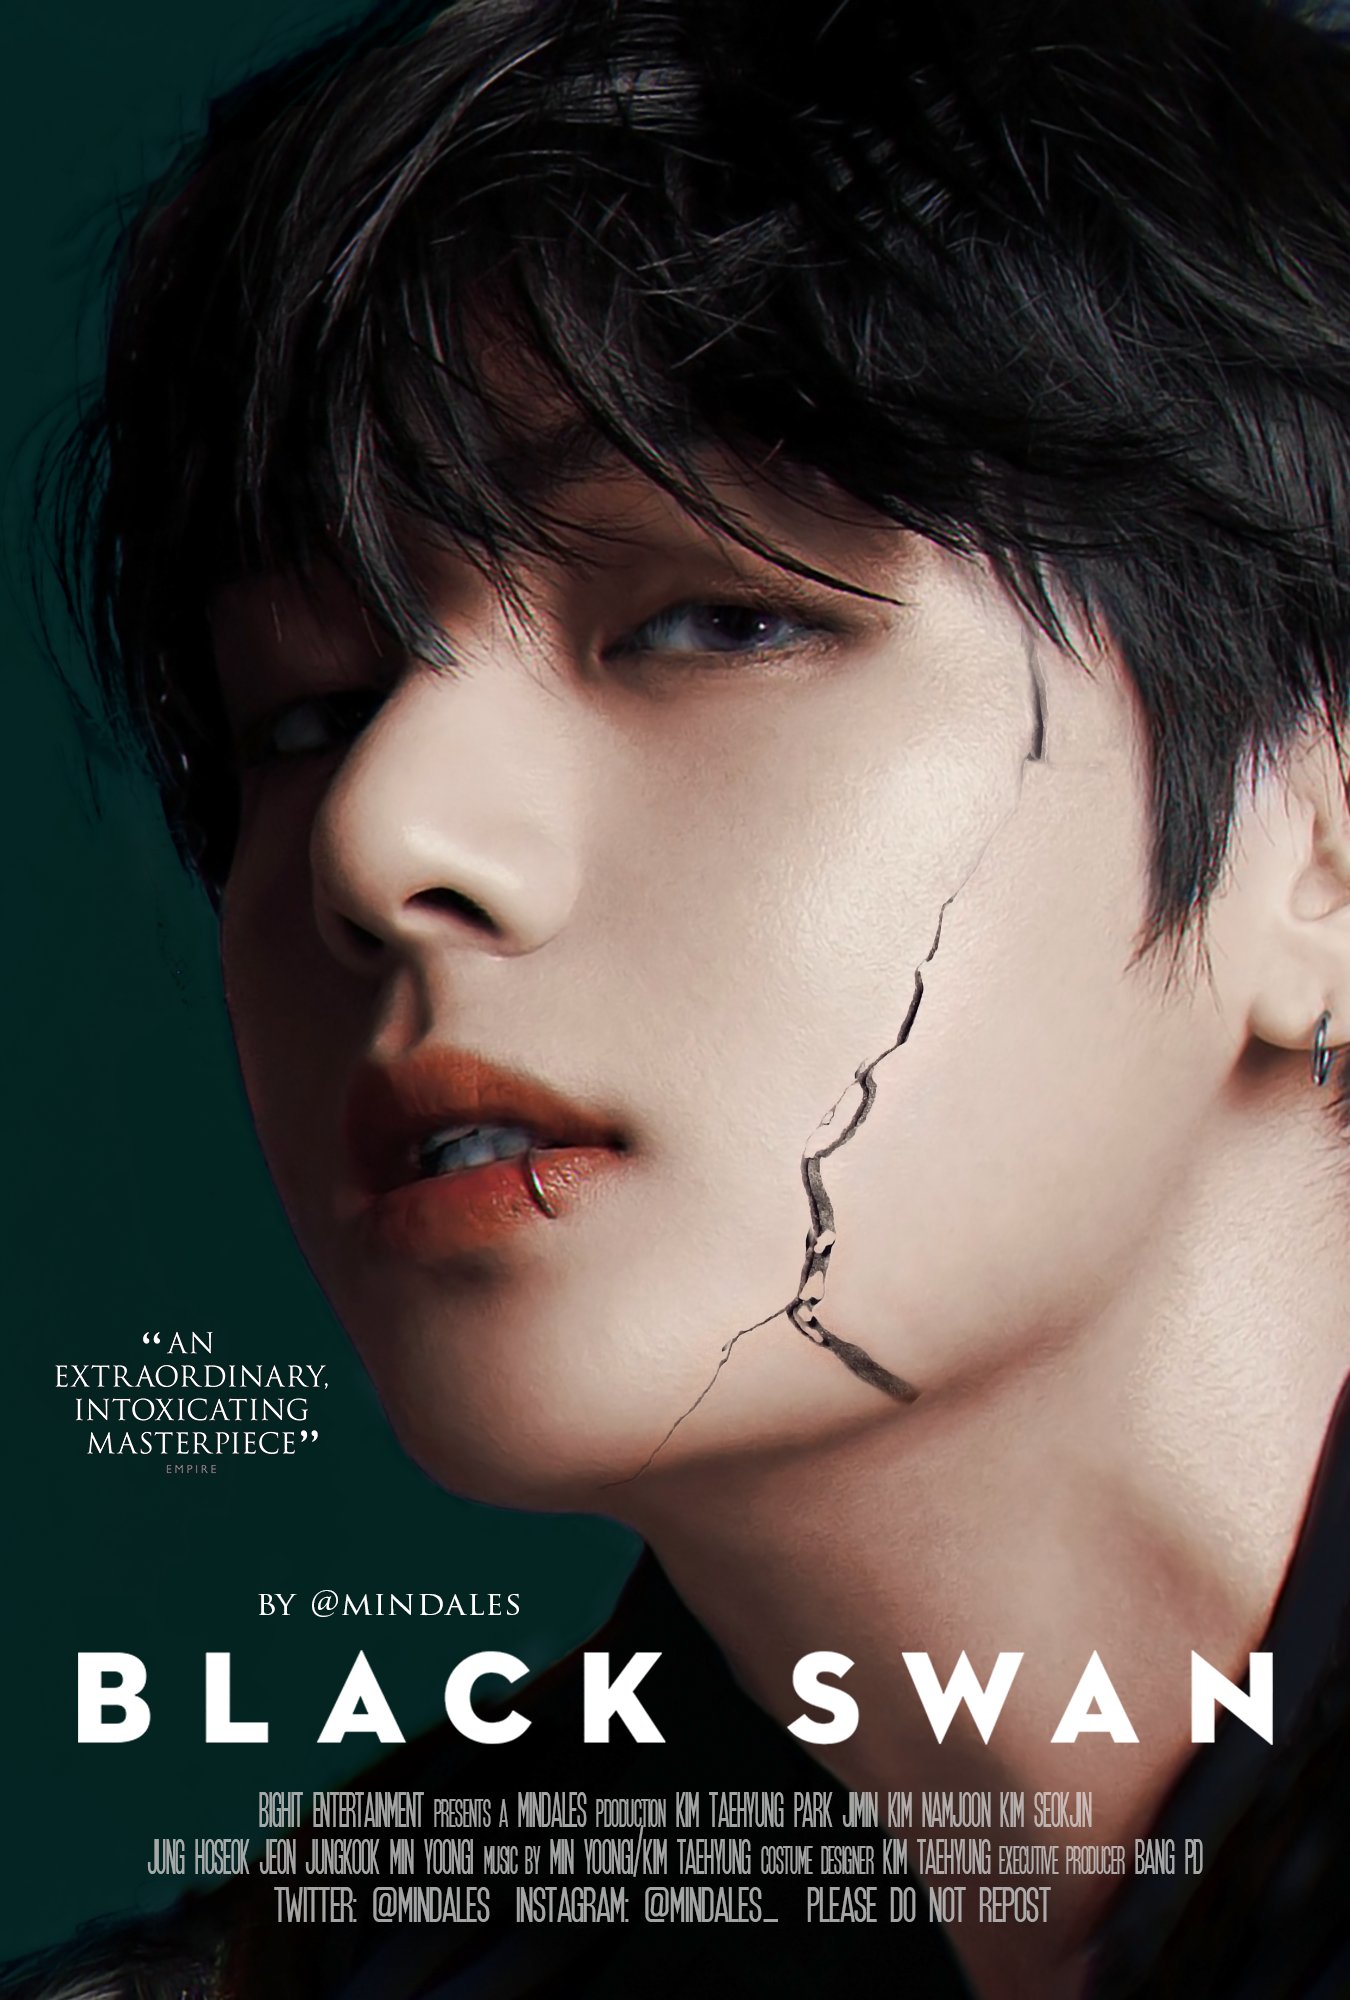 bts on Twitter: "Kim Taehyung in Black Swan, a psychological thriller about a dancer plunging into a profound @BTS_twt #BlackSwan https://t.co/ugfXGUe0ix" /